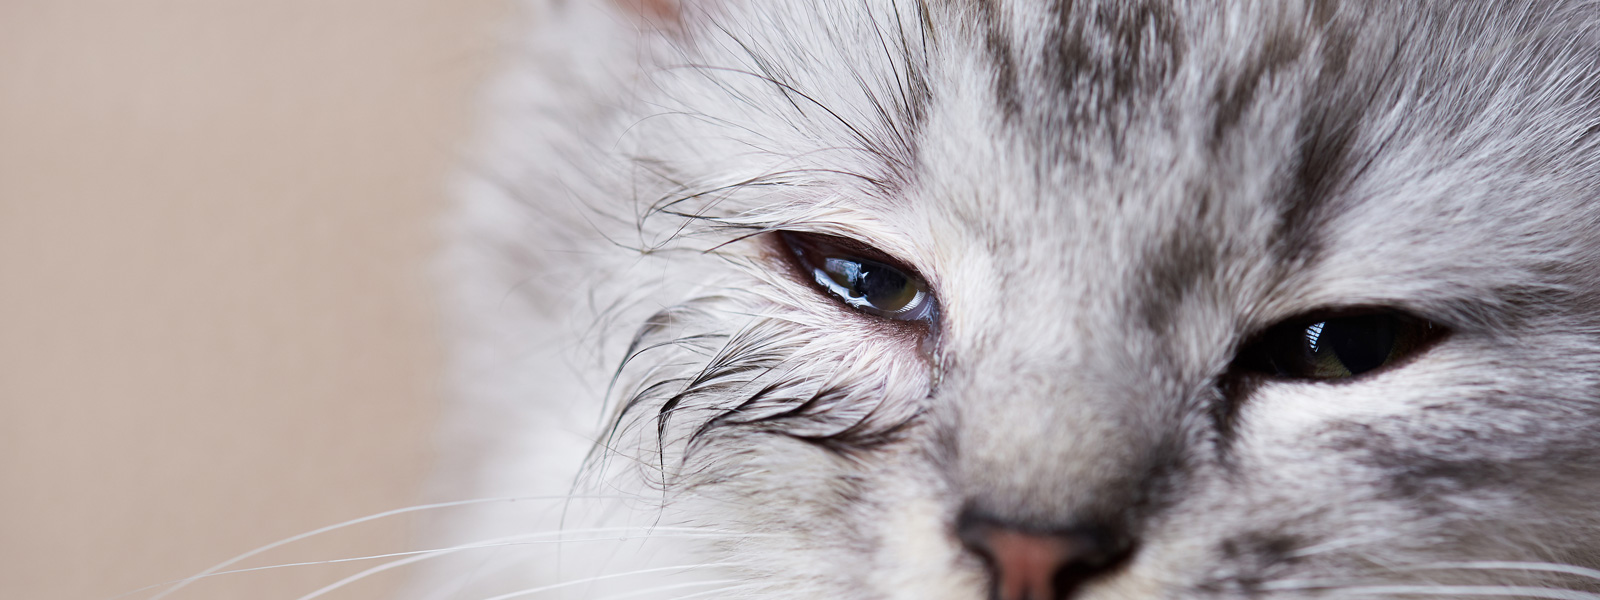 What You Should Know About Feline Asthma